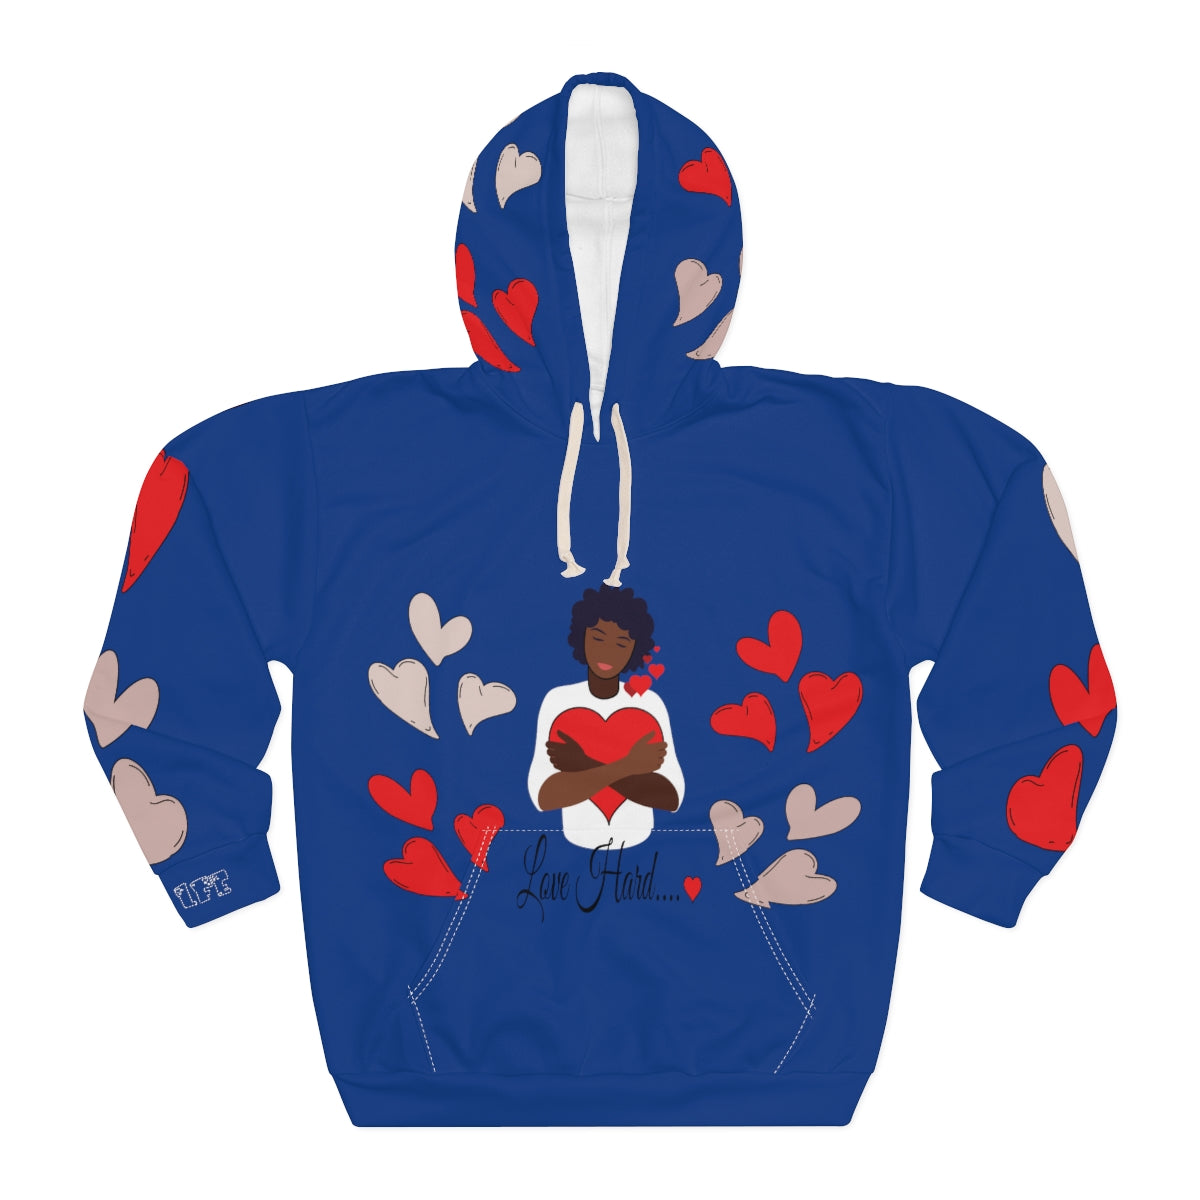 LOVE HARD BLUE Unisex Pullover Hoodie - PDR L.F.E. 